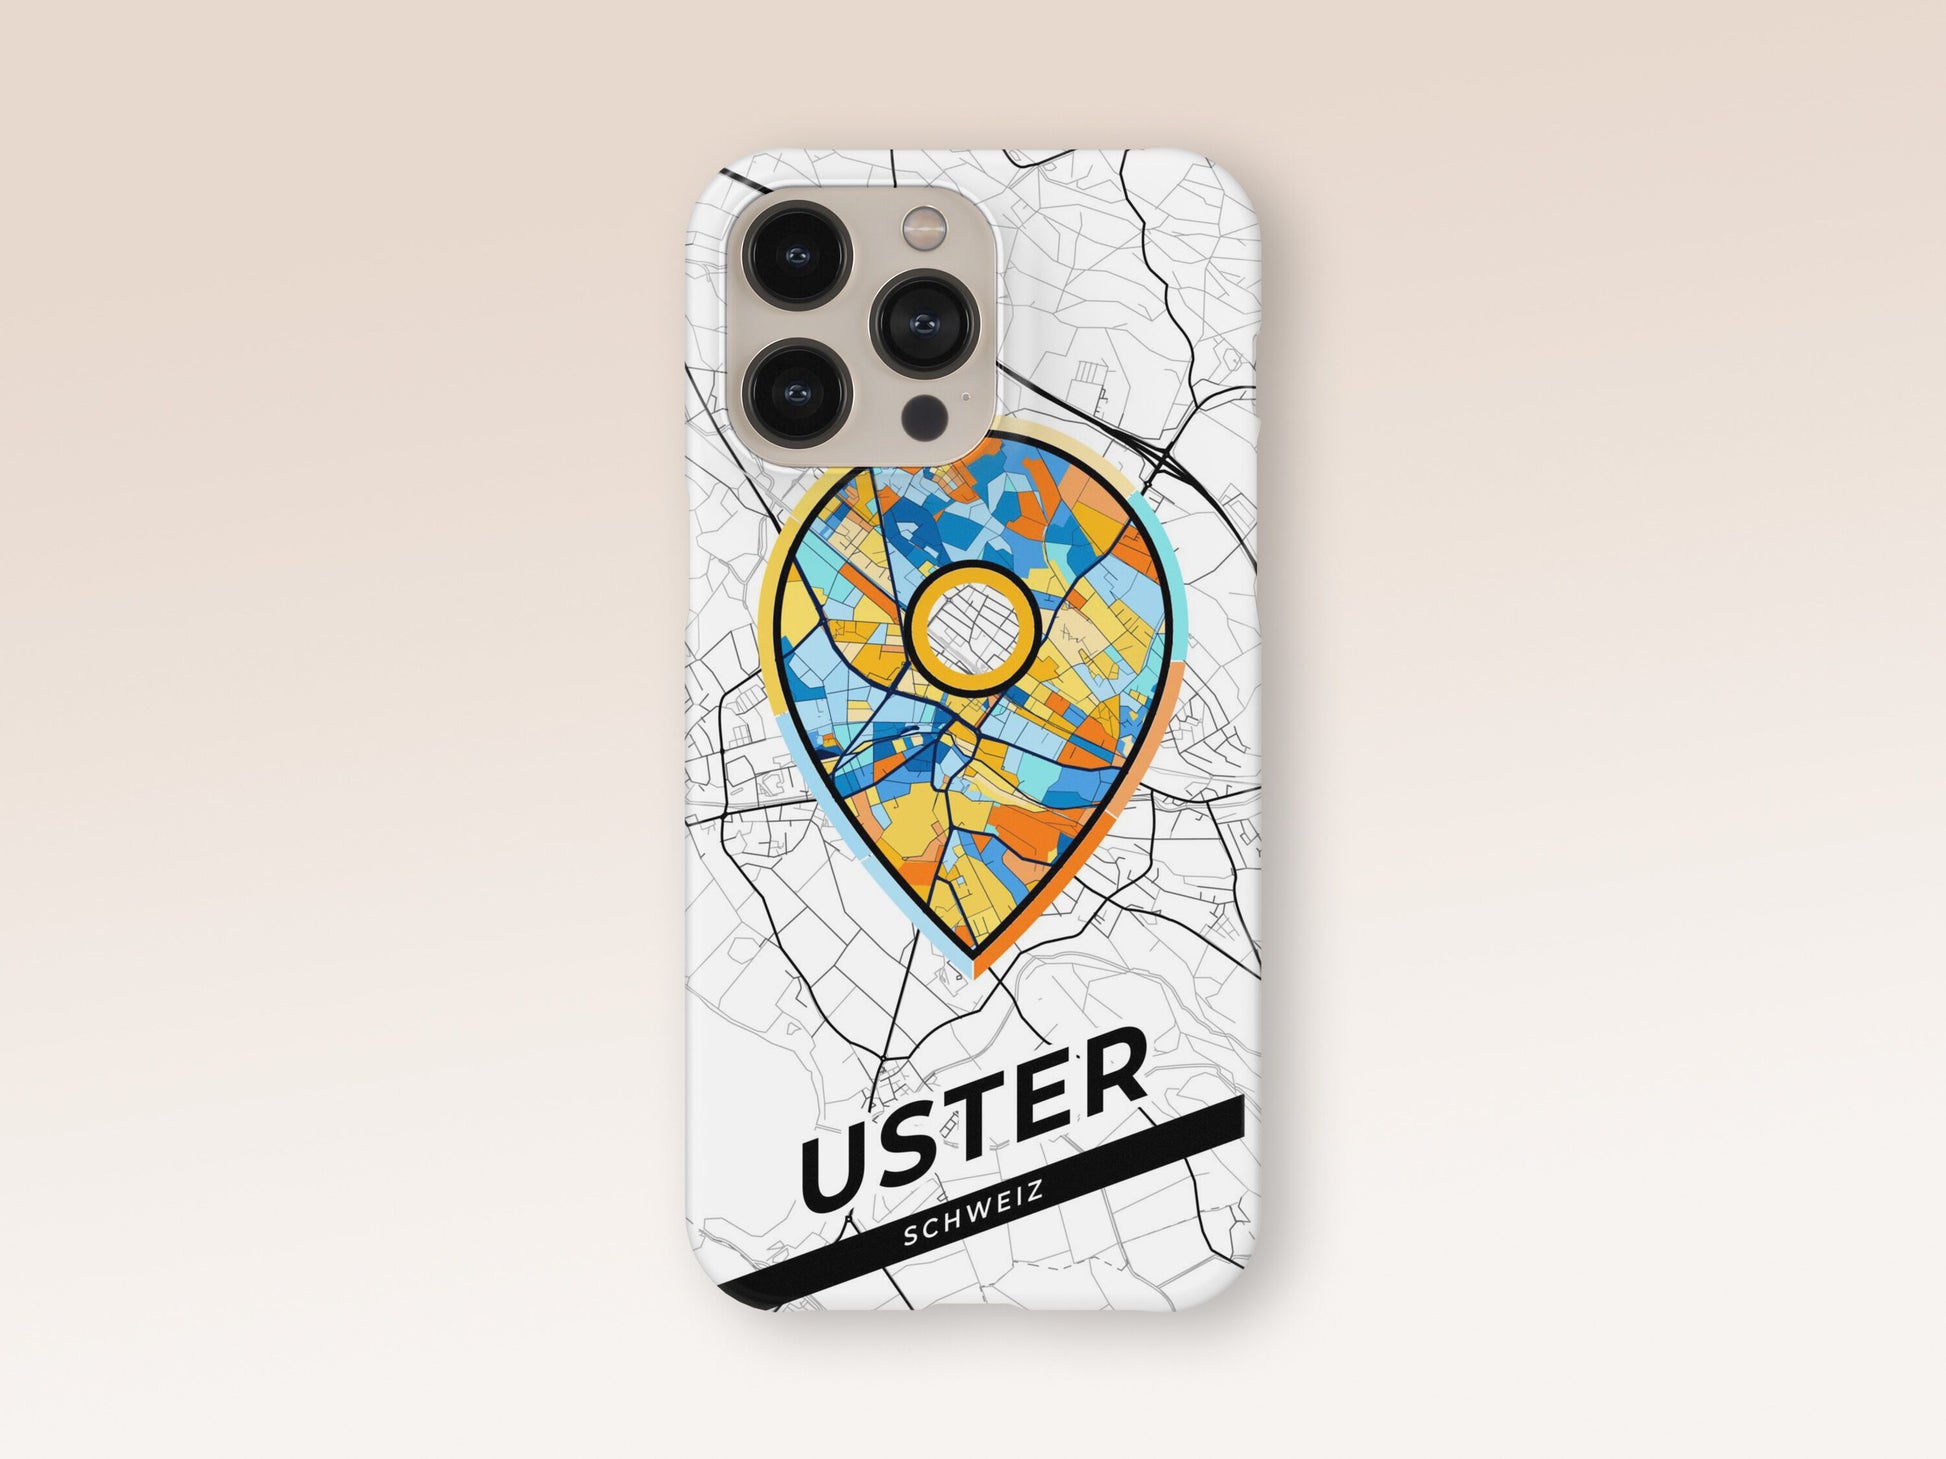 Uster Switzerland slim phone case with colorful icon 1